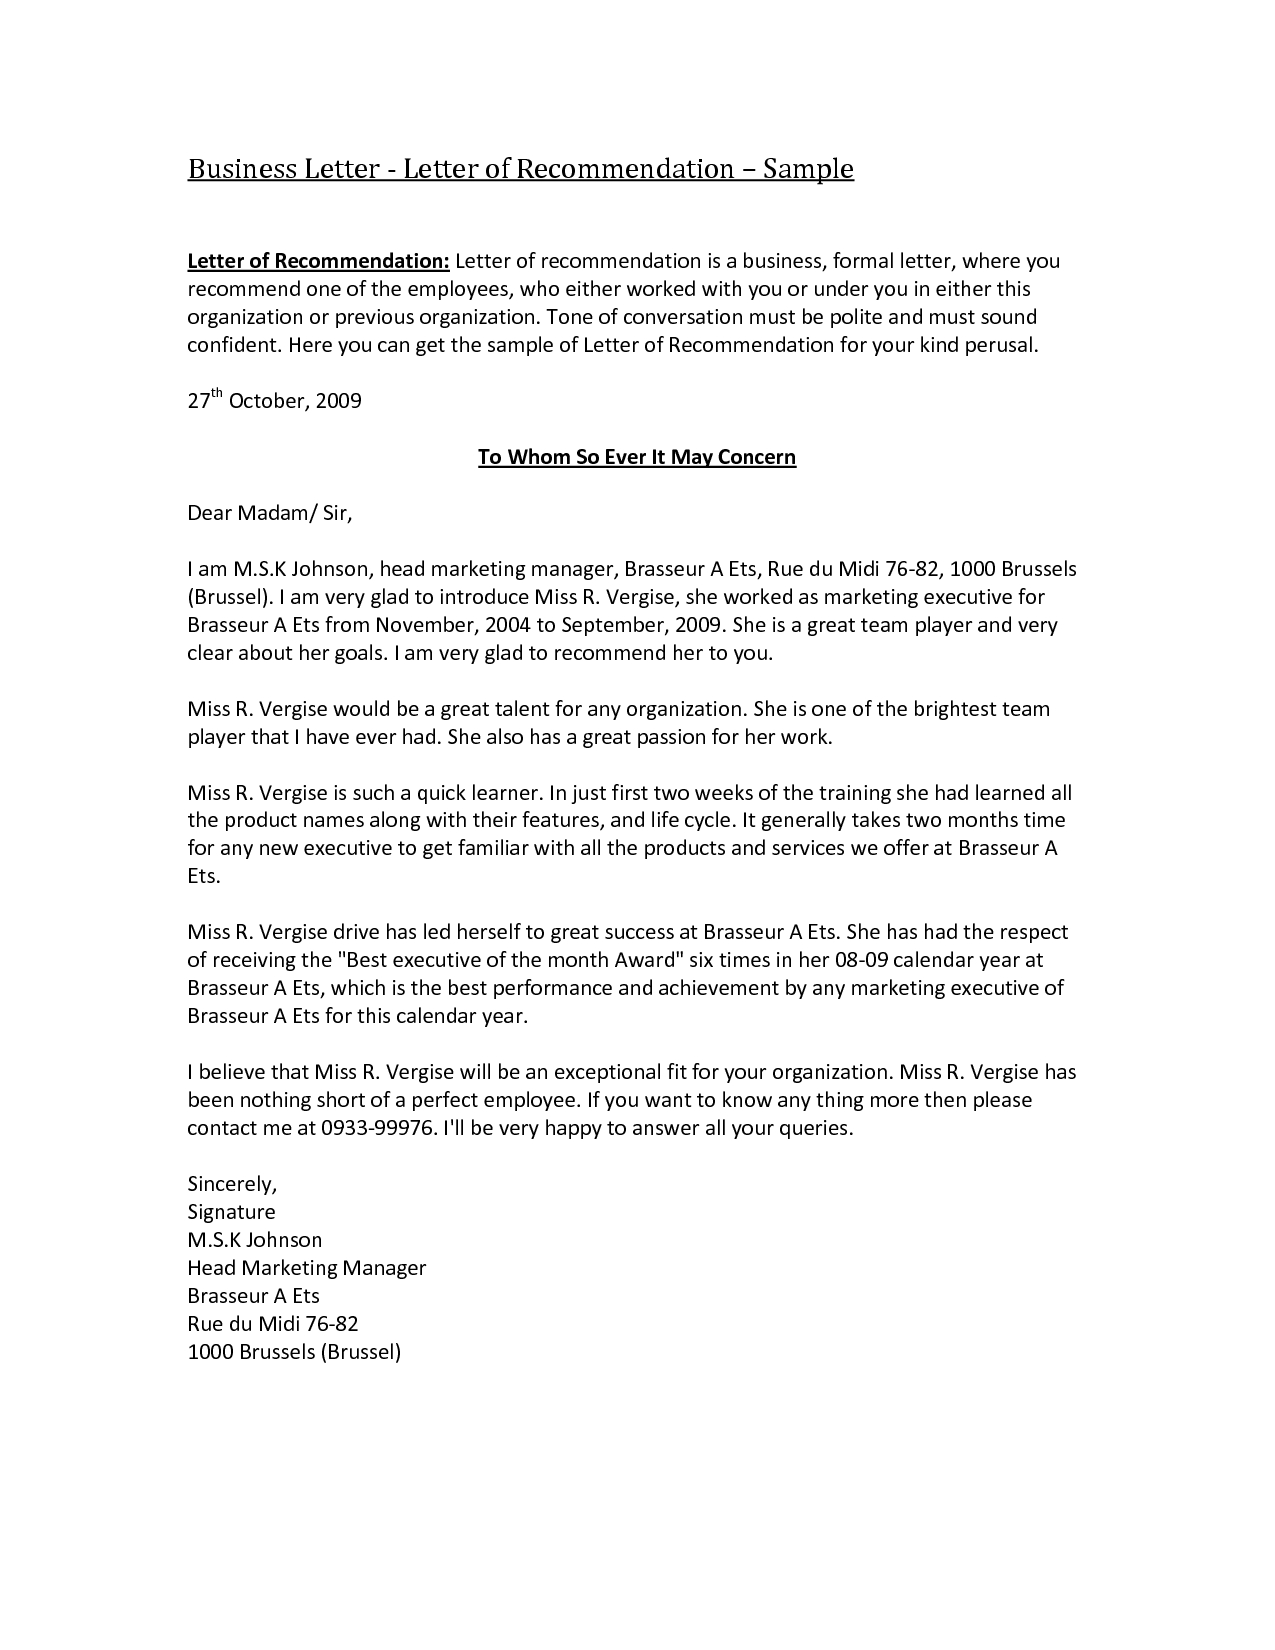 Personal Letter Of Recommendation for A Friend Template - Business Re Mendation Letter Template Acurnamedia